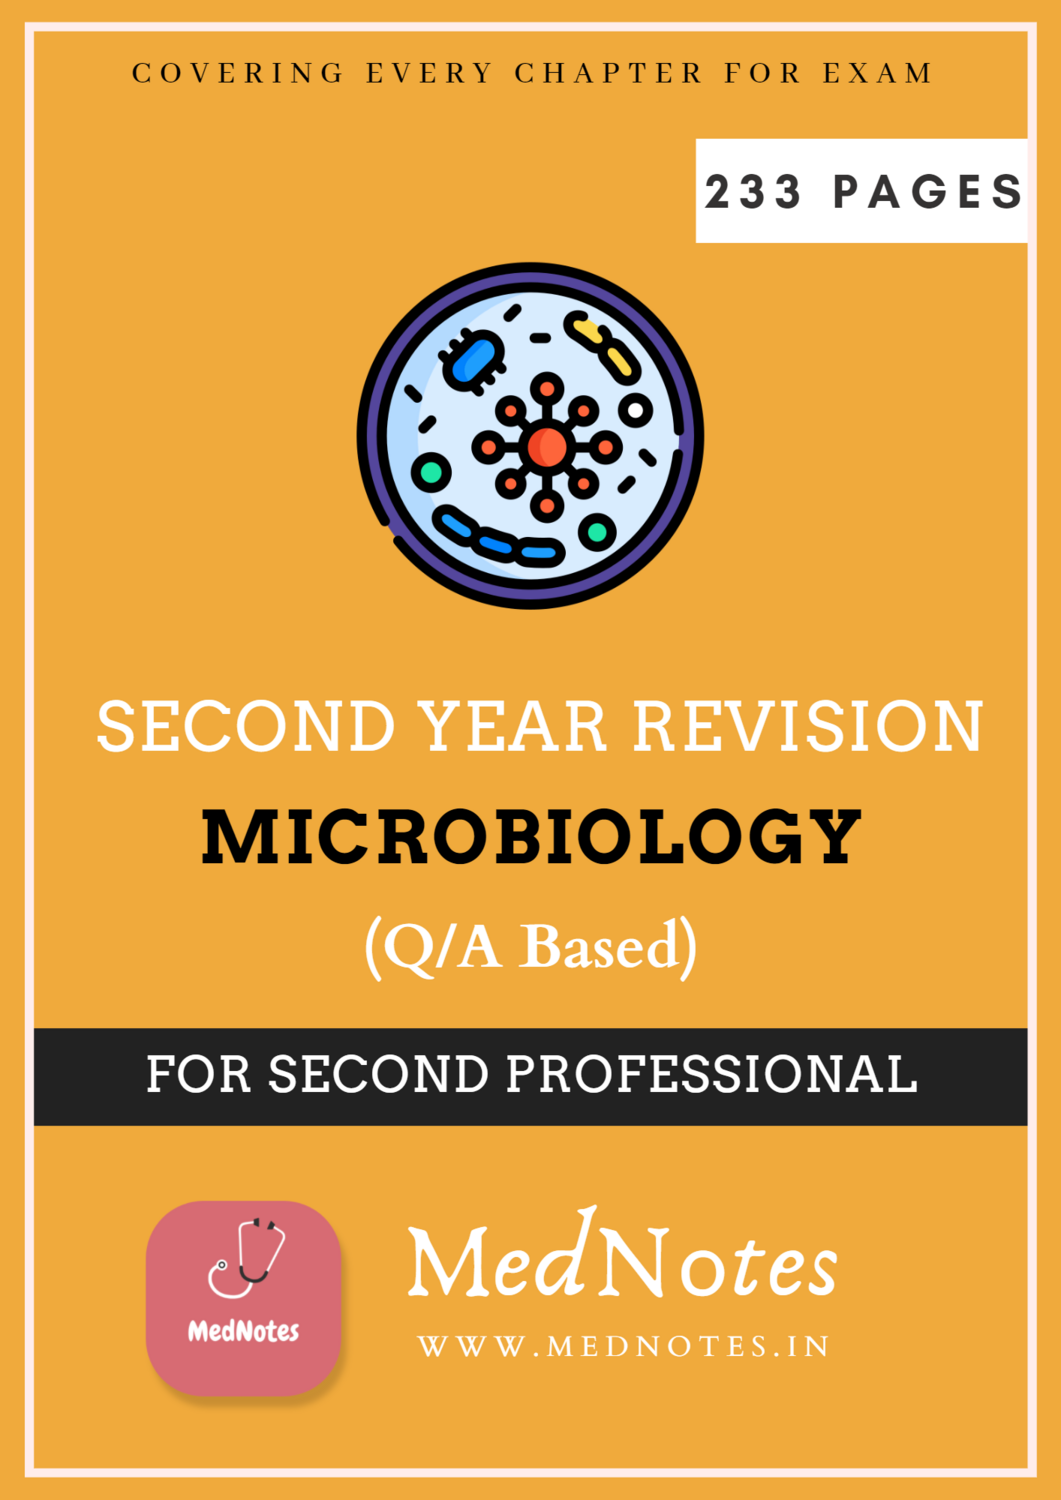 Full Microbiology Revision - Second Professional